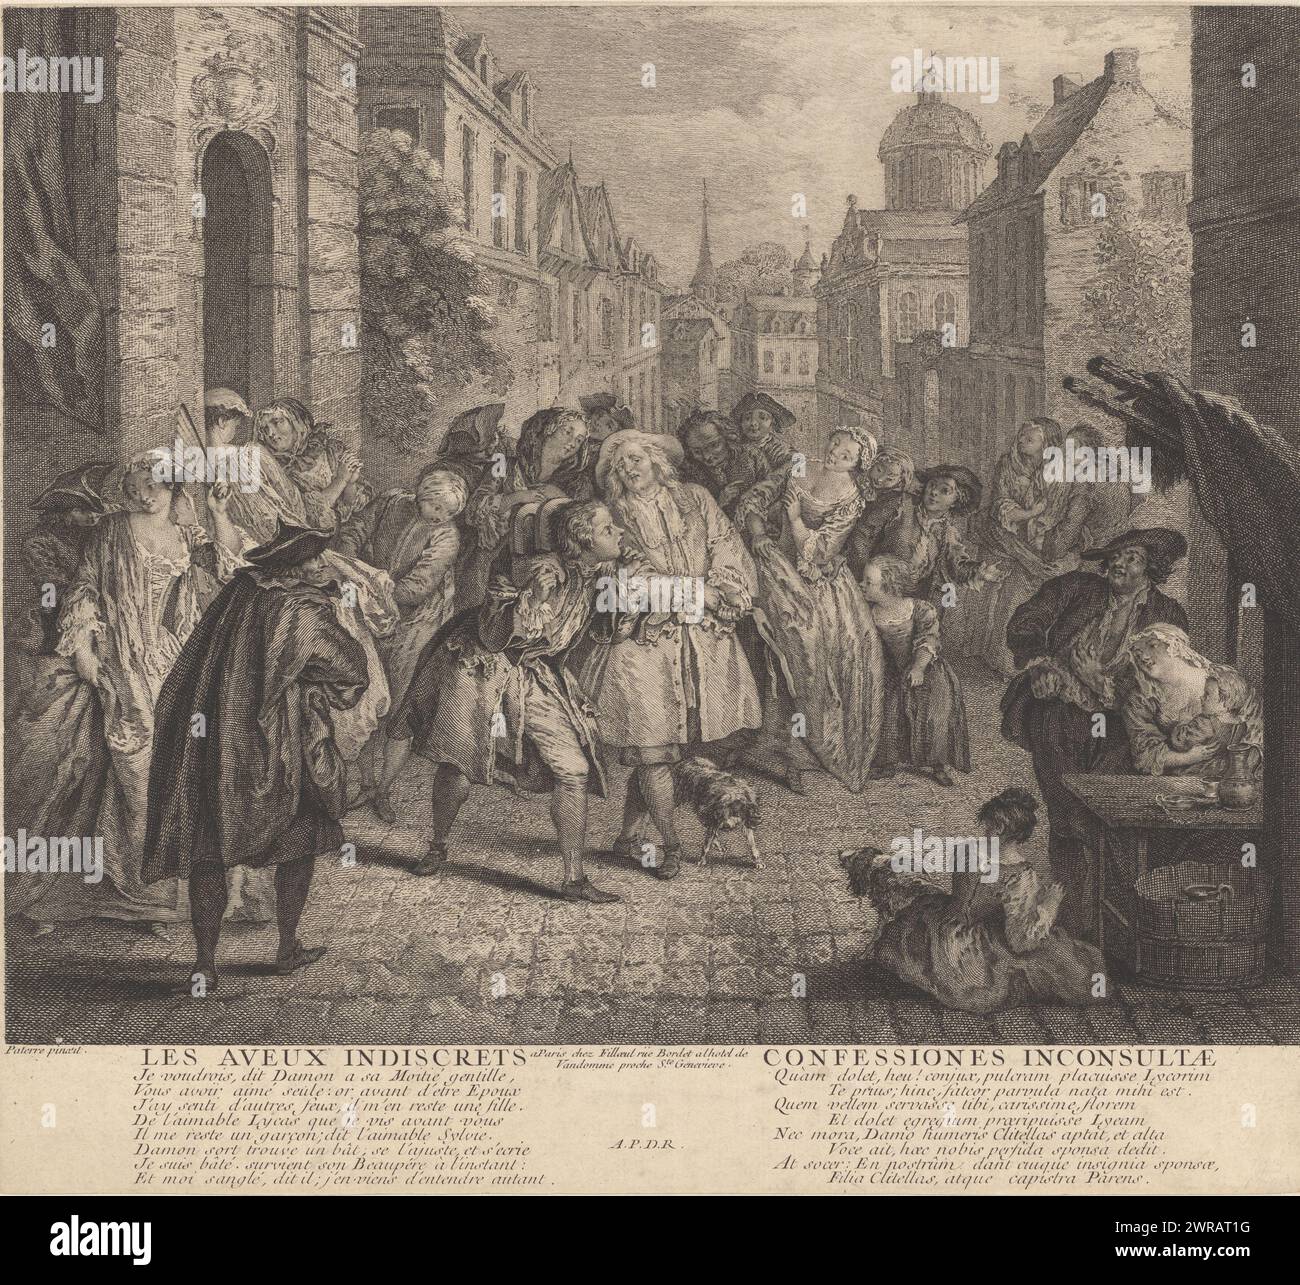 Street scene with Damon with a backpack and his father-in-law with a rod, Les Aveux Indiscrets / Confessiones Inconsultae (title on object), Fables by Jean de La Fontaine (series title), Suite d'Estampes Nouvelles pour les Contes de La Fontaine (series title), With eight-line verse at the bottom in French and Latin., print maker: Nicolas de Larmessin (III), after painting by: Jean Baptiste François Pater, publisher: Pierre Filloeul, print maker: France, publisher: Paris, c. 1734 - c. 1743, paper, etching, height 333 mm × width 367 mm, print Stock Photo